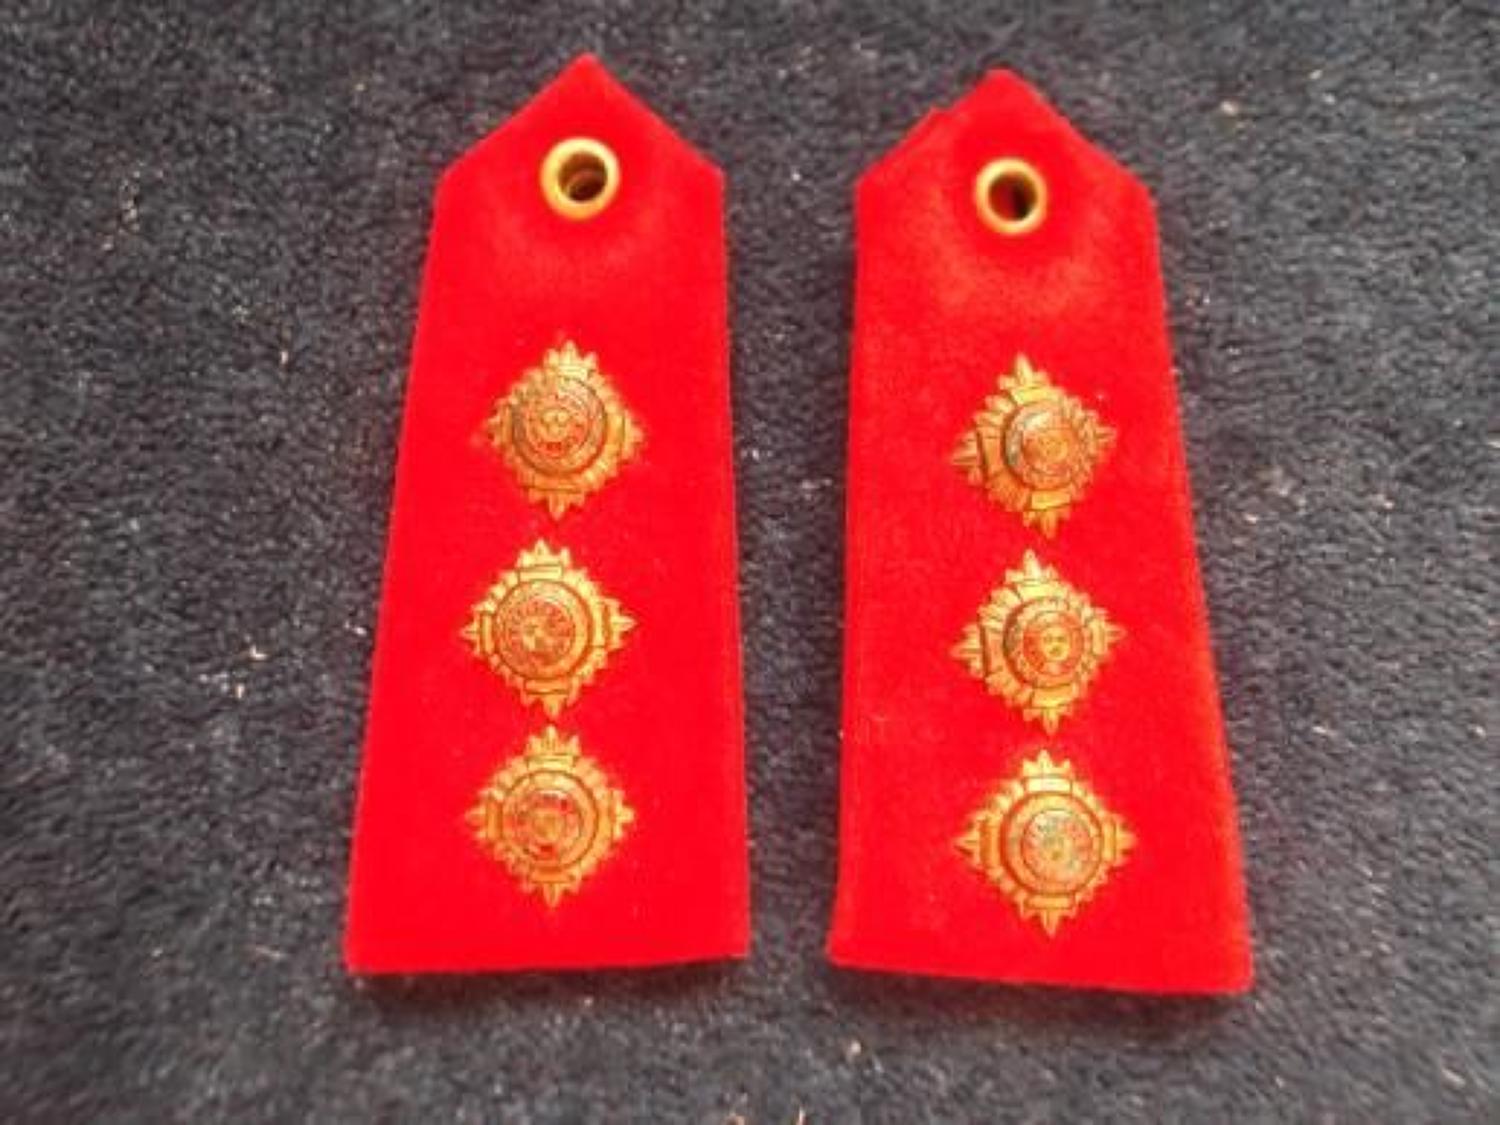 Mess Dress Shoulder Rank. Three brass pips for Captain.